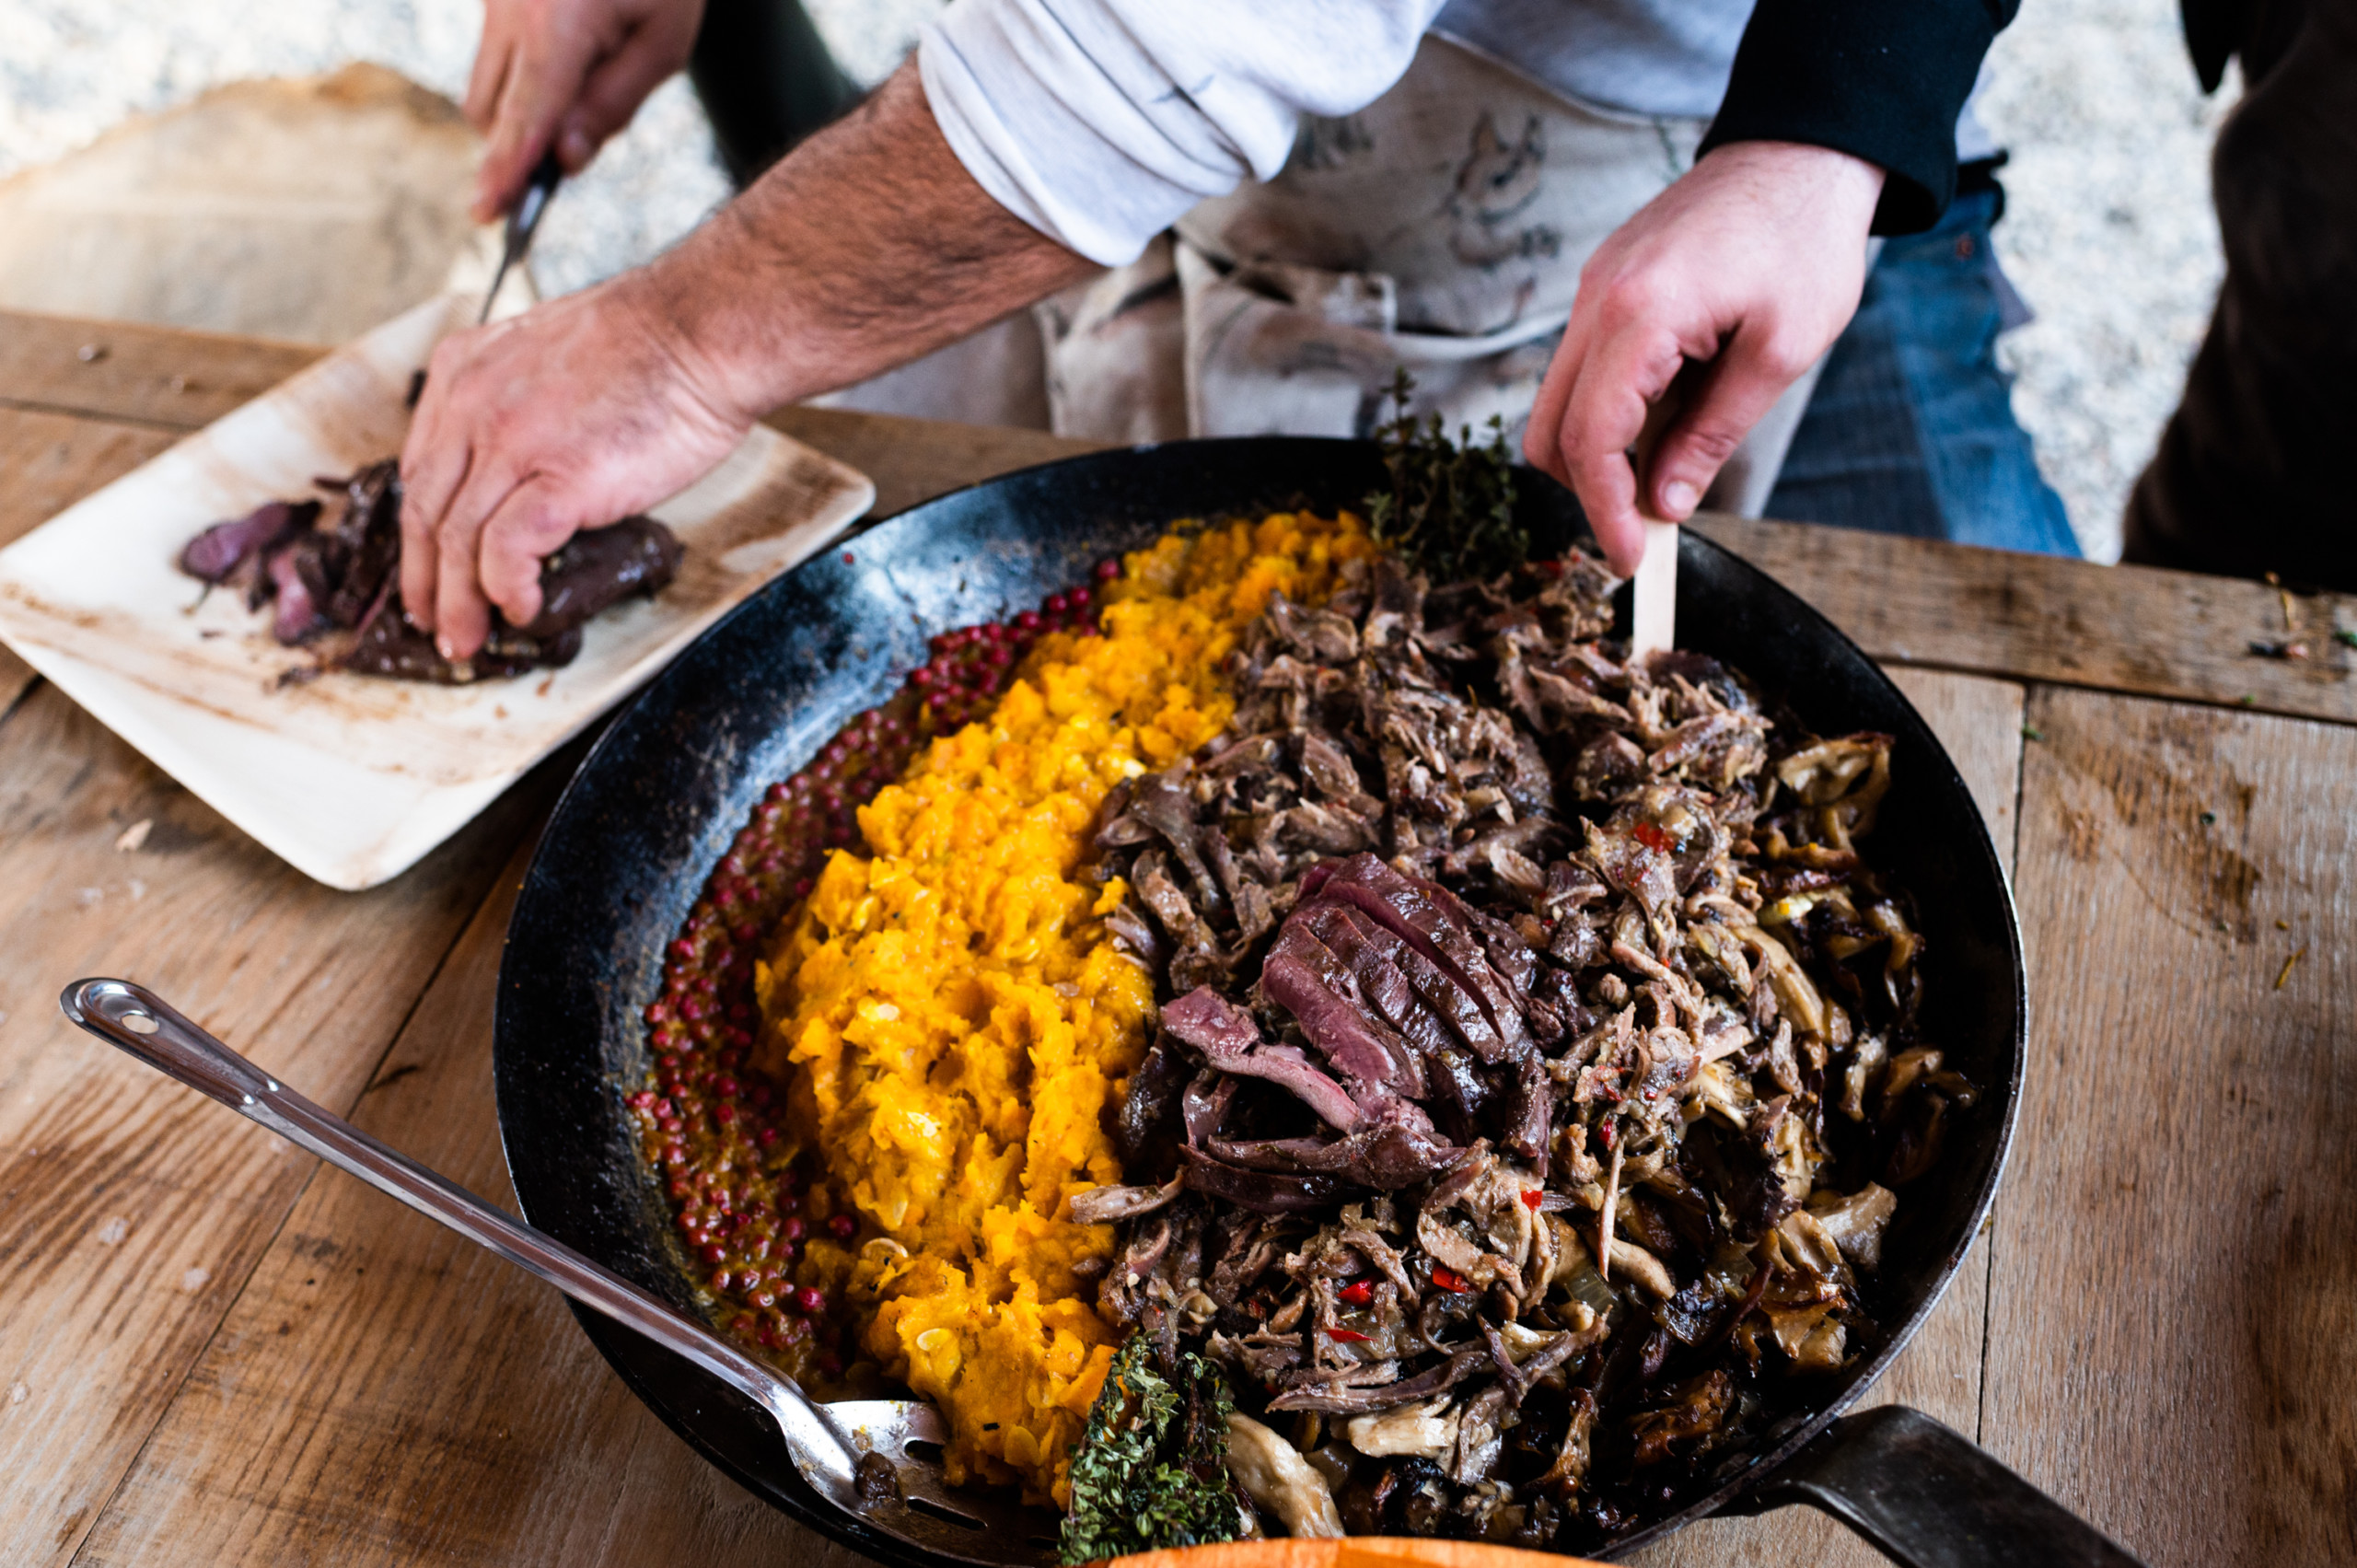 Venison heart, squash and mushrooms cooked at SquirrelFest 2019 at Ironbound Farms